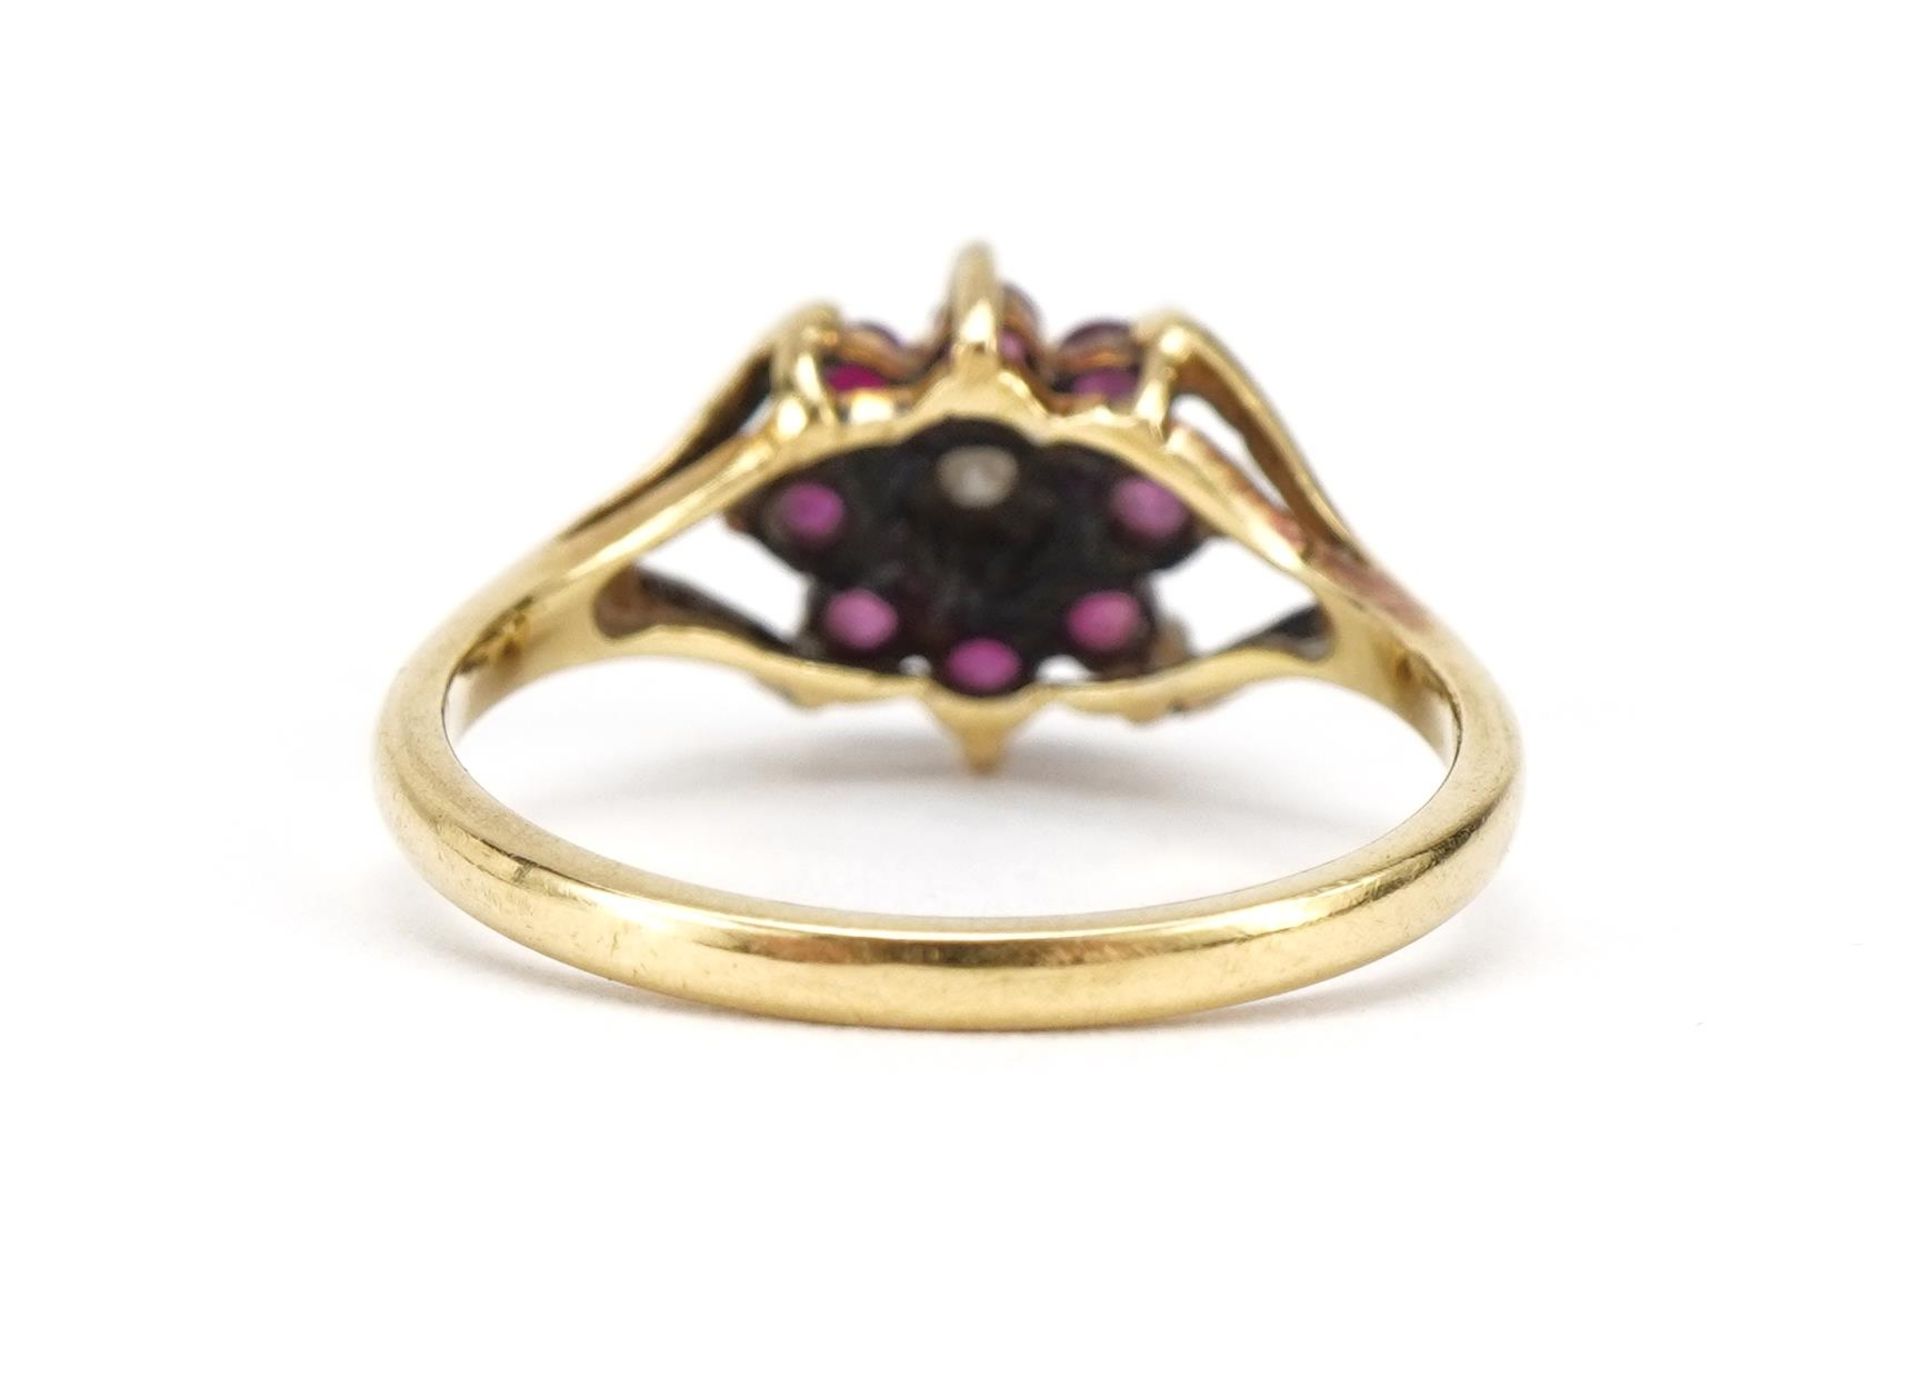 18ct gold diamond and ruby two tier flower head ring, size M, 2.9g - Image 2 of 4